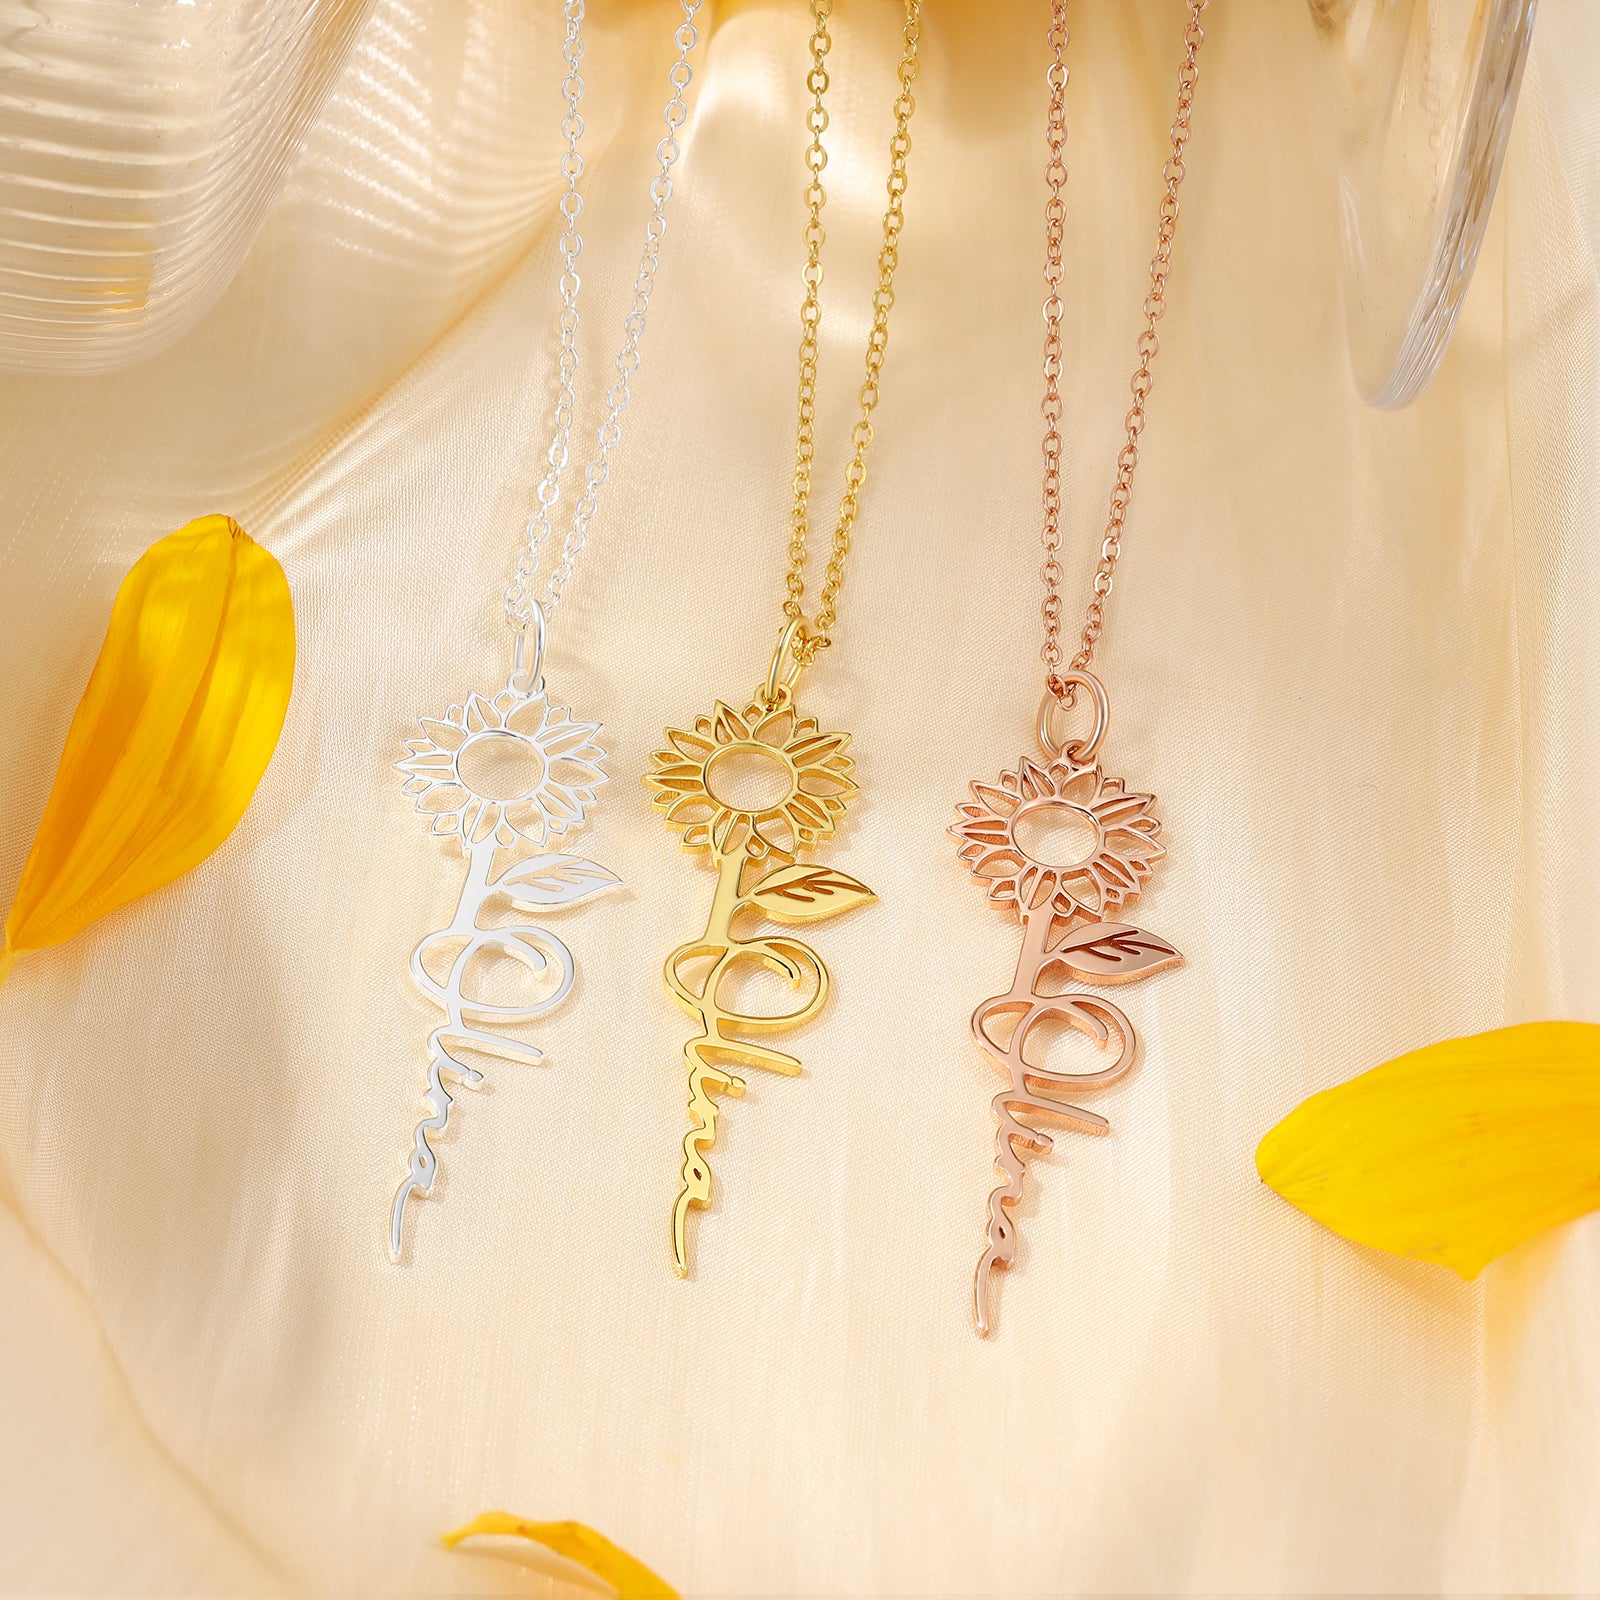 Crafted Sunflower Necklace in Exquisite Gold Finishes